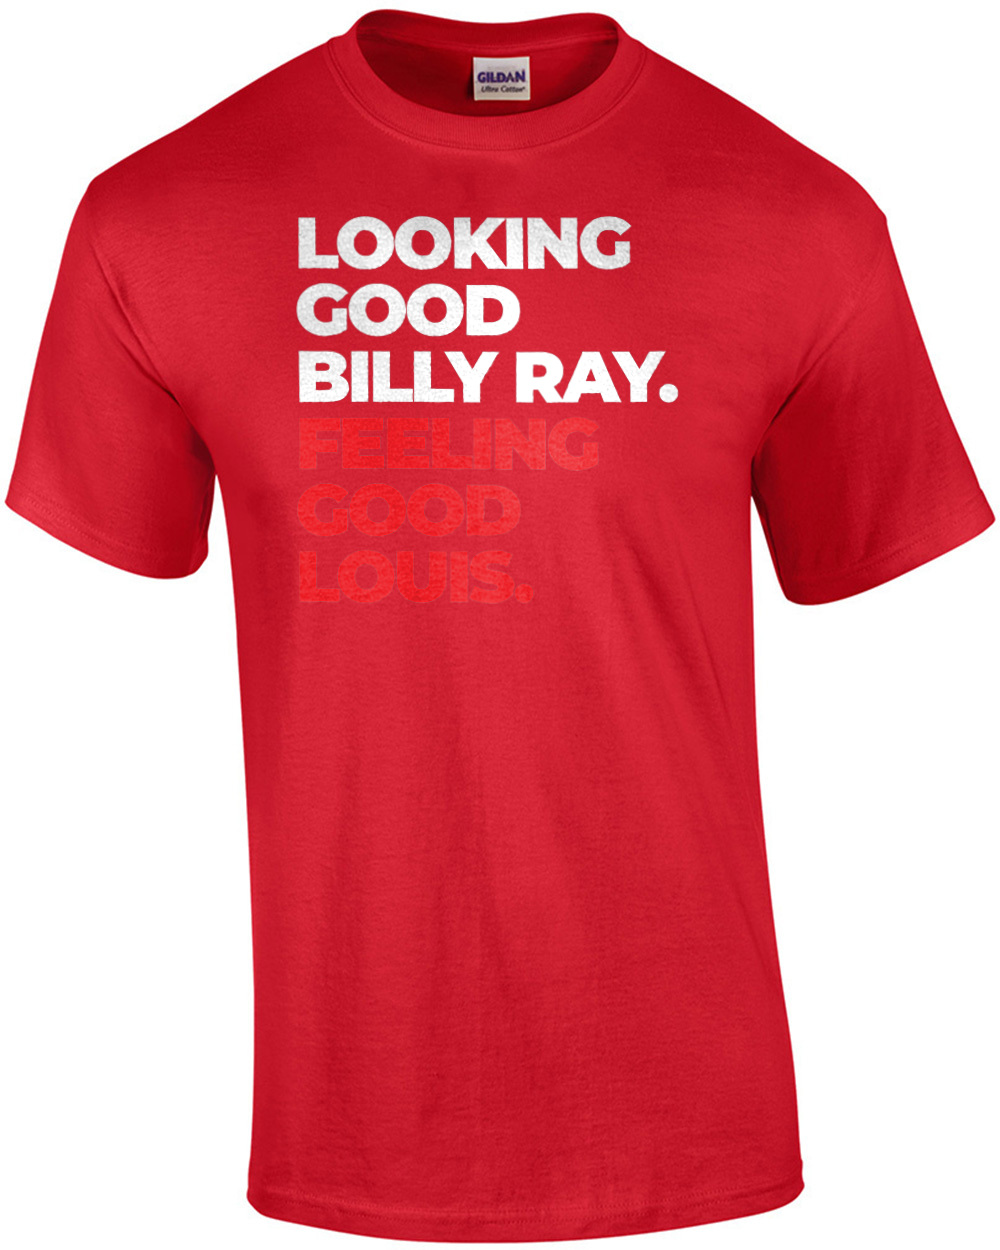  Looking Good Billy Ray feeling good Louis tshirt : Clothing,  Shoes & Jewelry